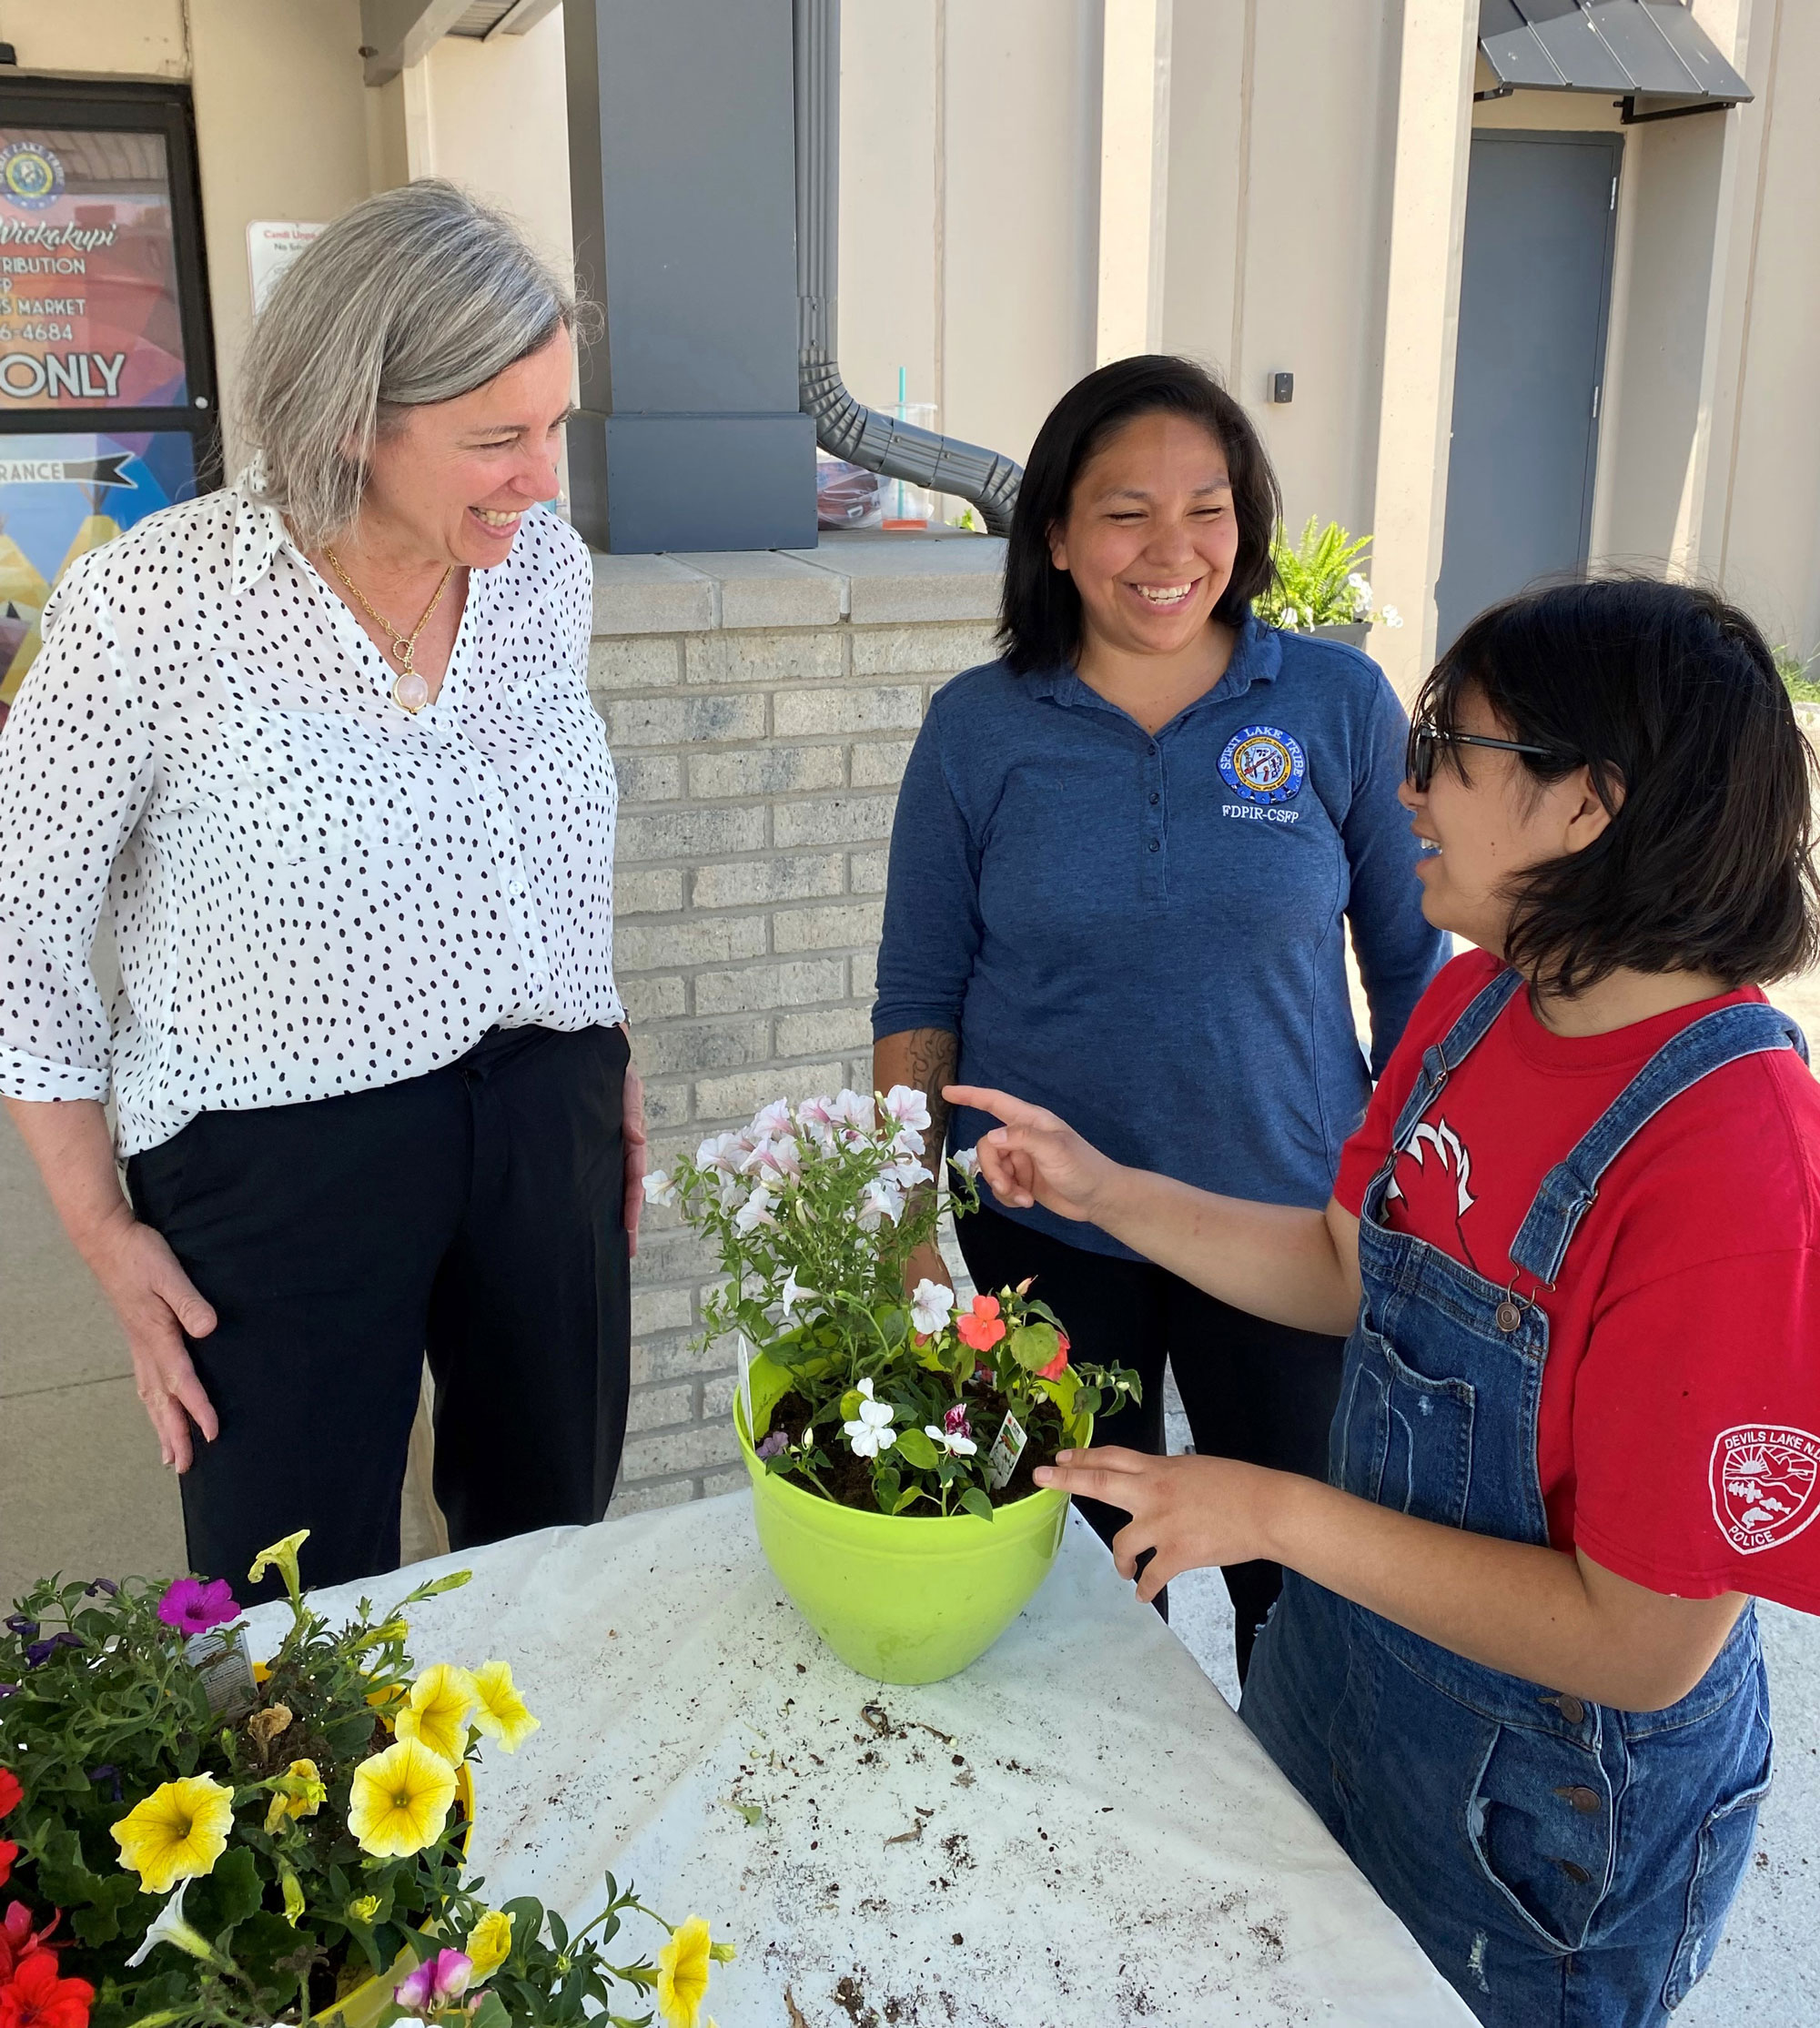 Deputy Under Secretary Stacy Dean smiles with another woman as a child plants flowers in a green pot as part of a youth gardening activity at the Spirit Lake Sioux FDPIR building